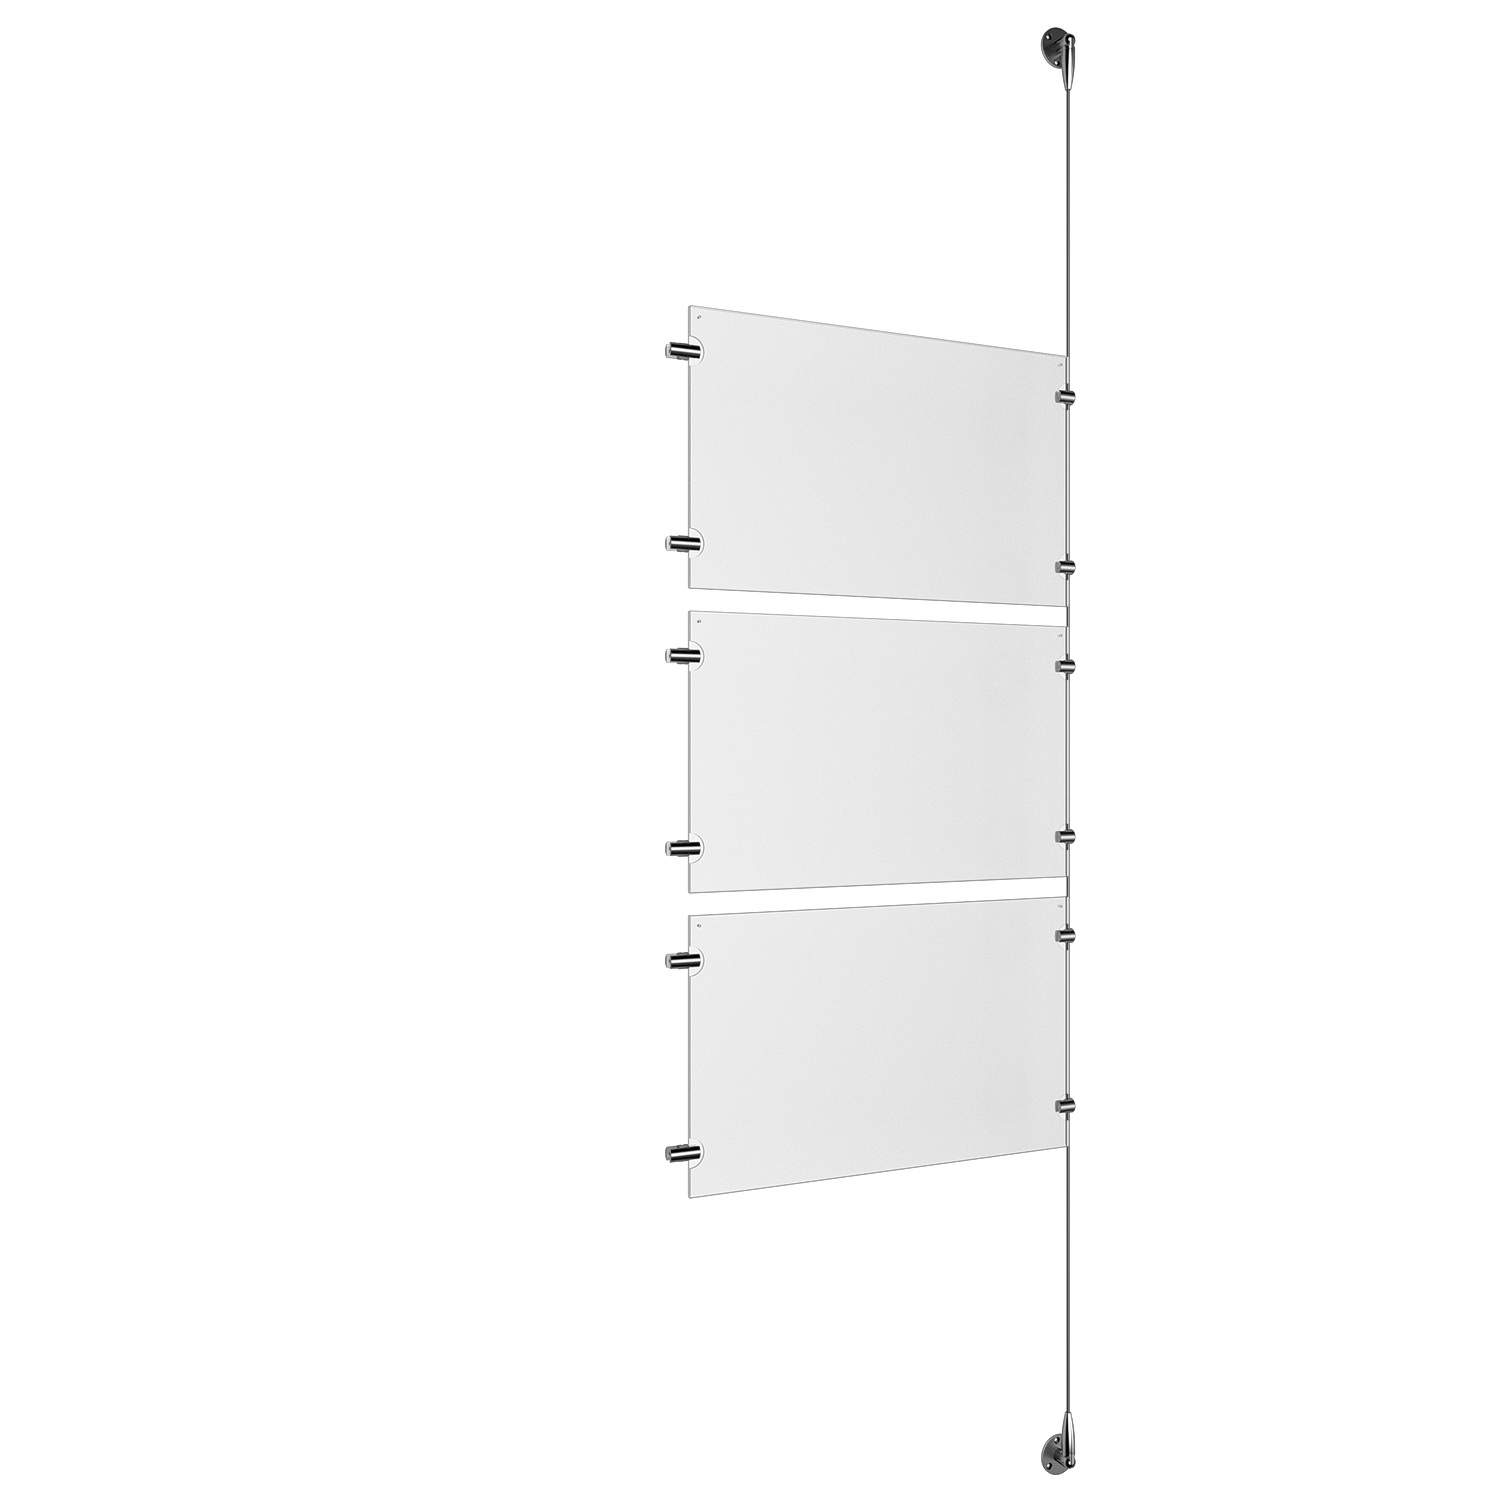 (3) 17'' Width x 11'' Height Clear Acrylic Frame & (1) Stainless Steel Satin Brushed Adjustable Angle Signature 1/8'' Cable Systems with (6) Single-Sided Panel Grippers (6) Double-Sided Panel Grippers